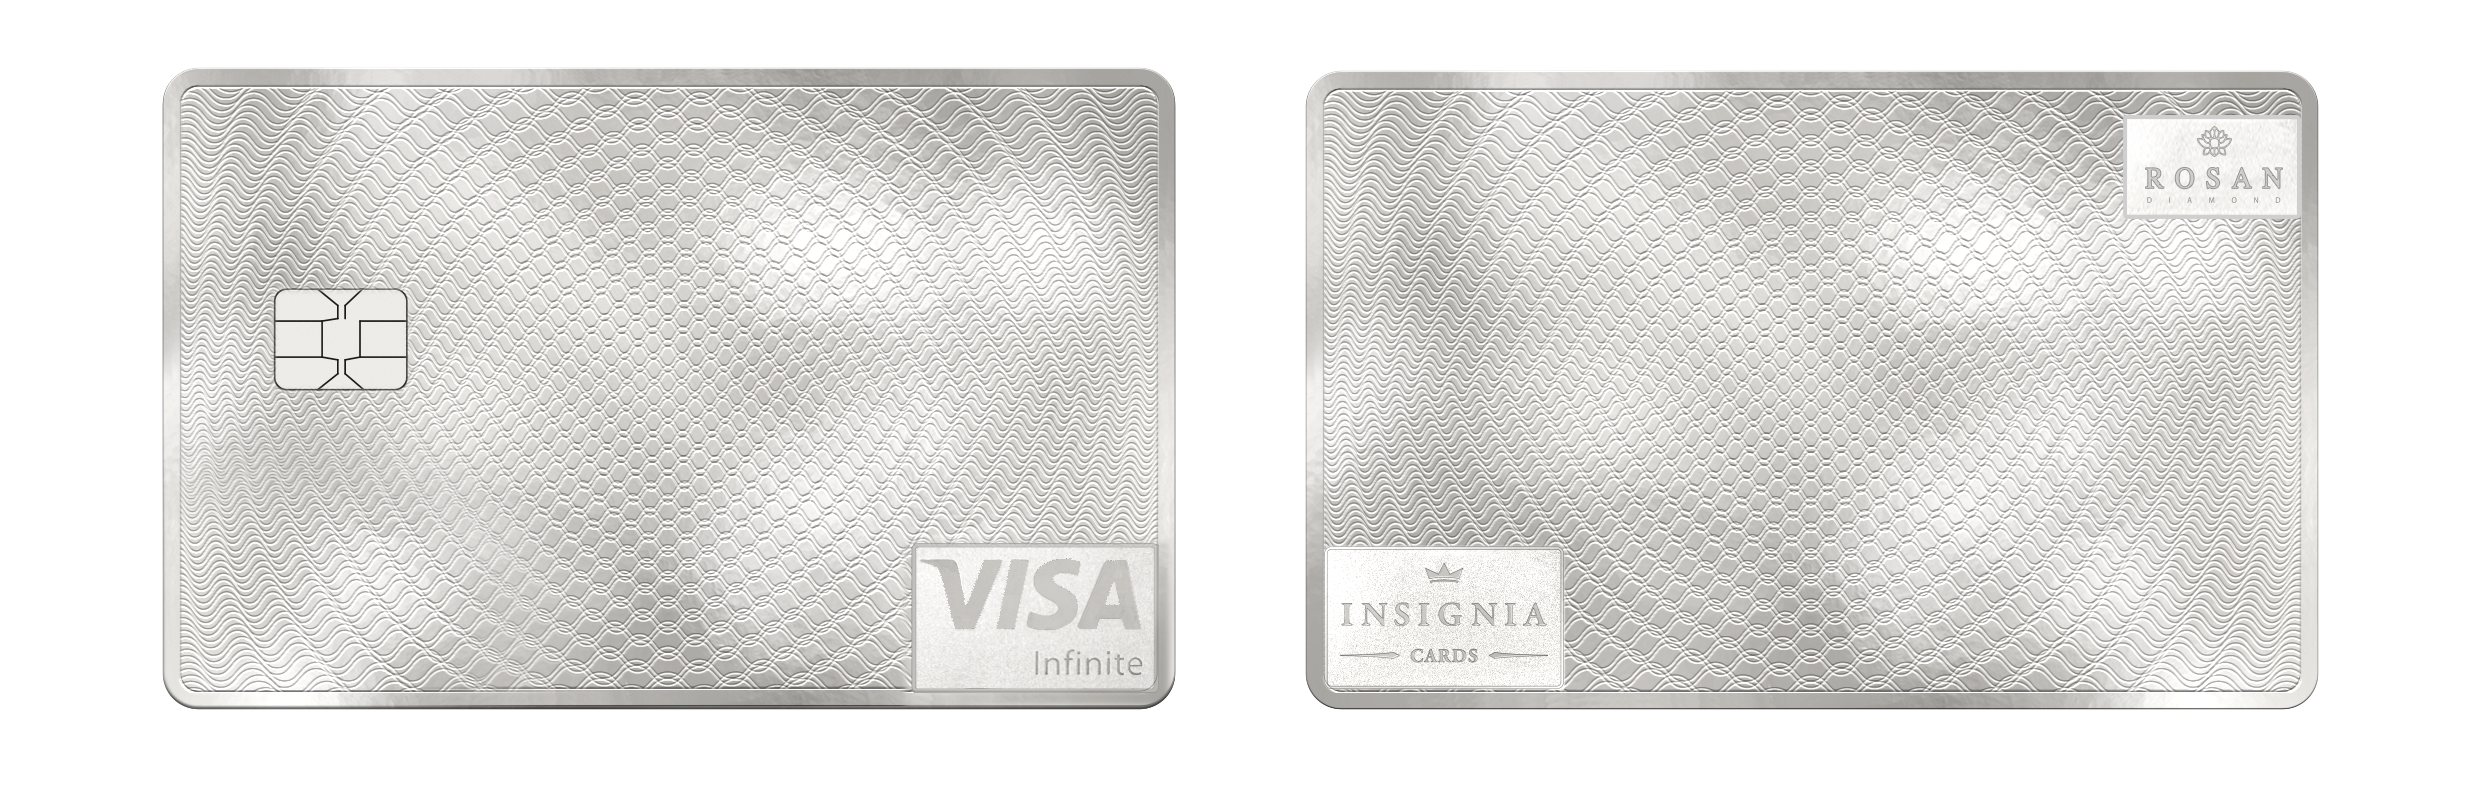 Image for Reduce Transmission Of  COVID-19 With Insignia’s Clean Payment Card